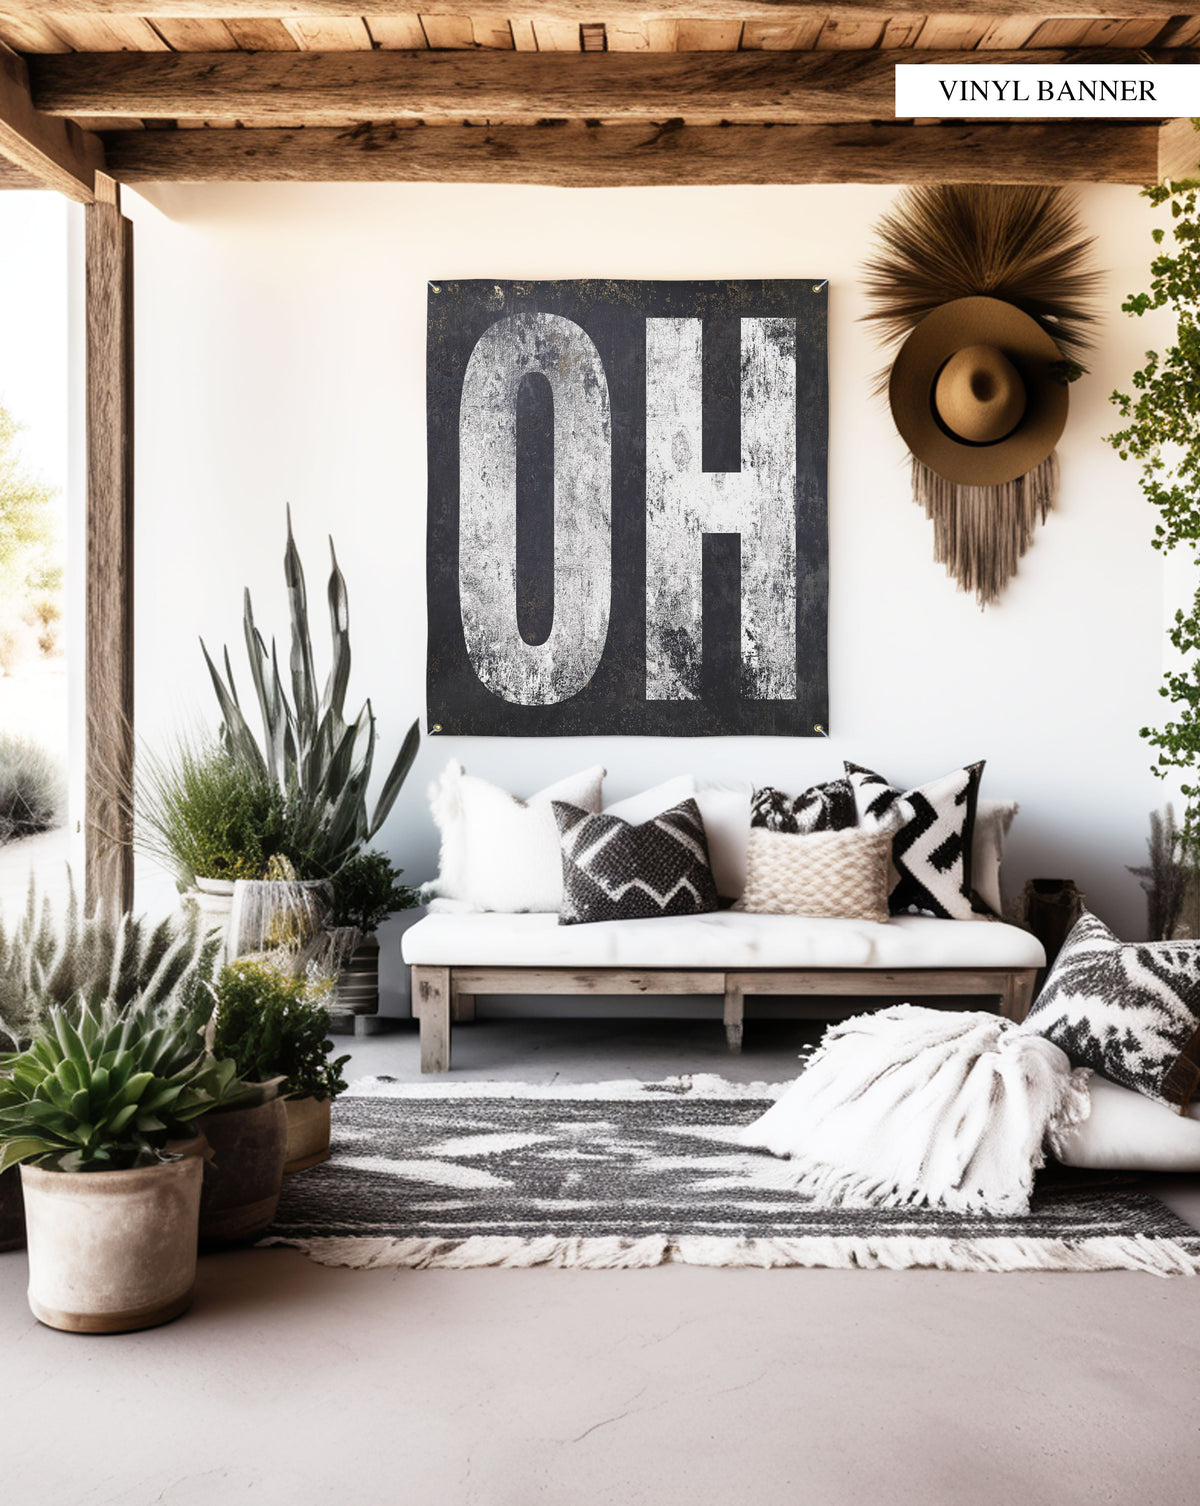 Durable 'OH' vinyl banner featuring elegant white on a weathered black backdrop, a bold statement of Ohio allegiance. Weatherproof and versatile, it adds sophistication to any space, indoors or out.